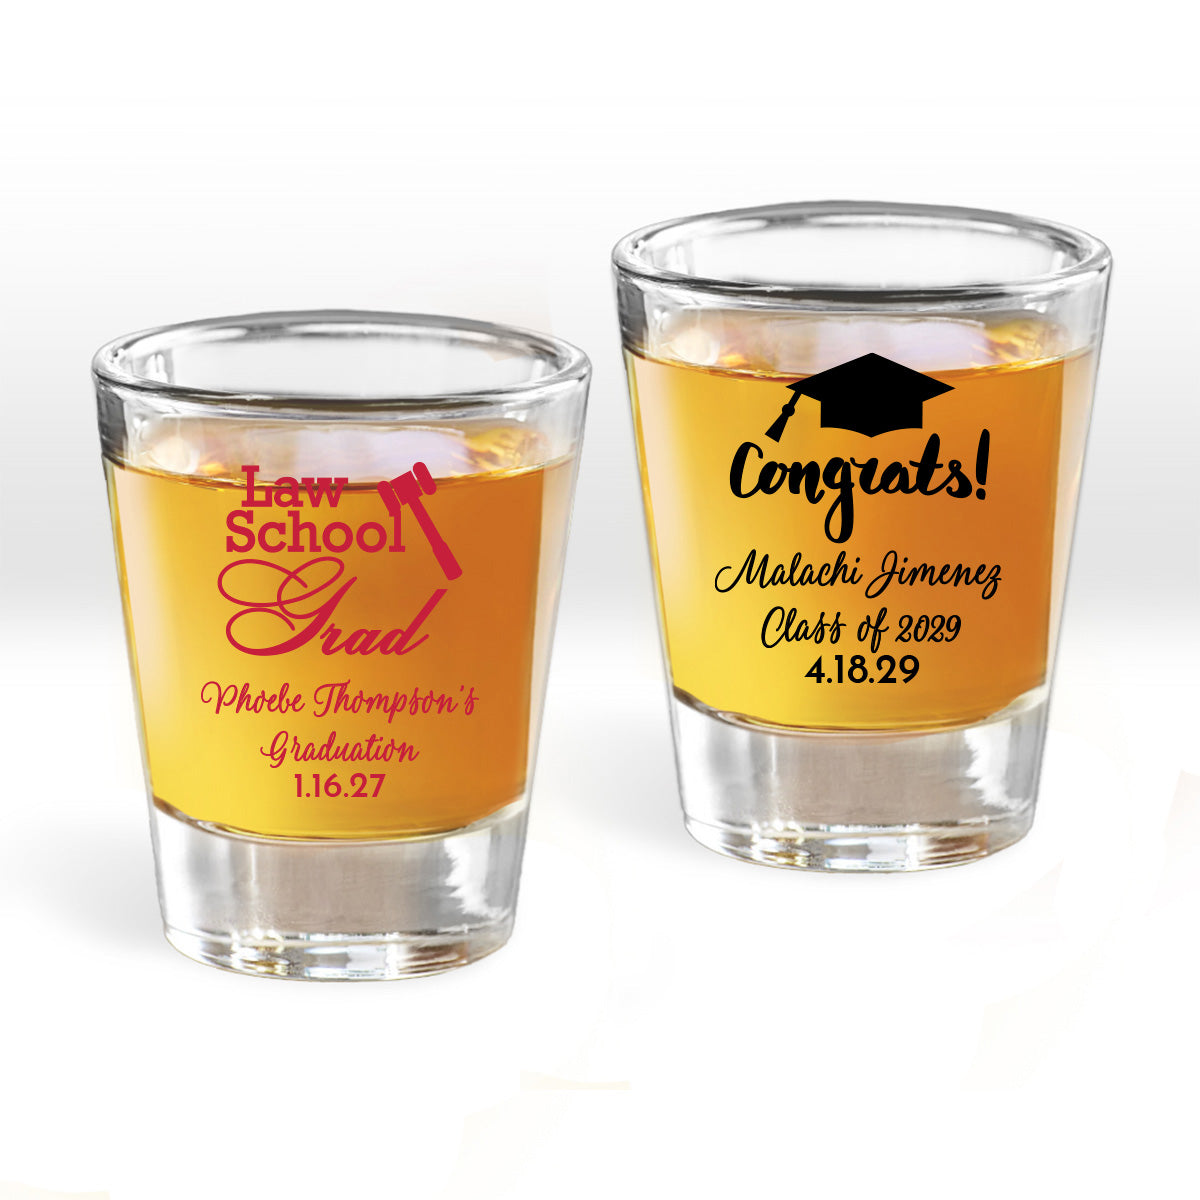 Law School Grad Personalized Fluted Shot Glass (Set of 24)